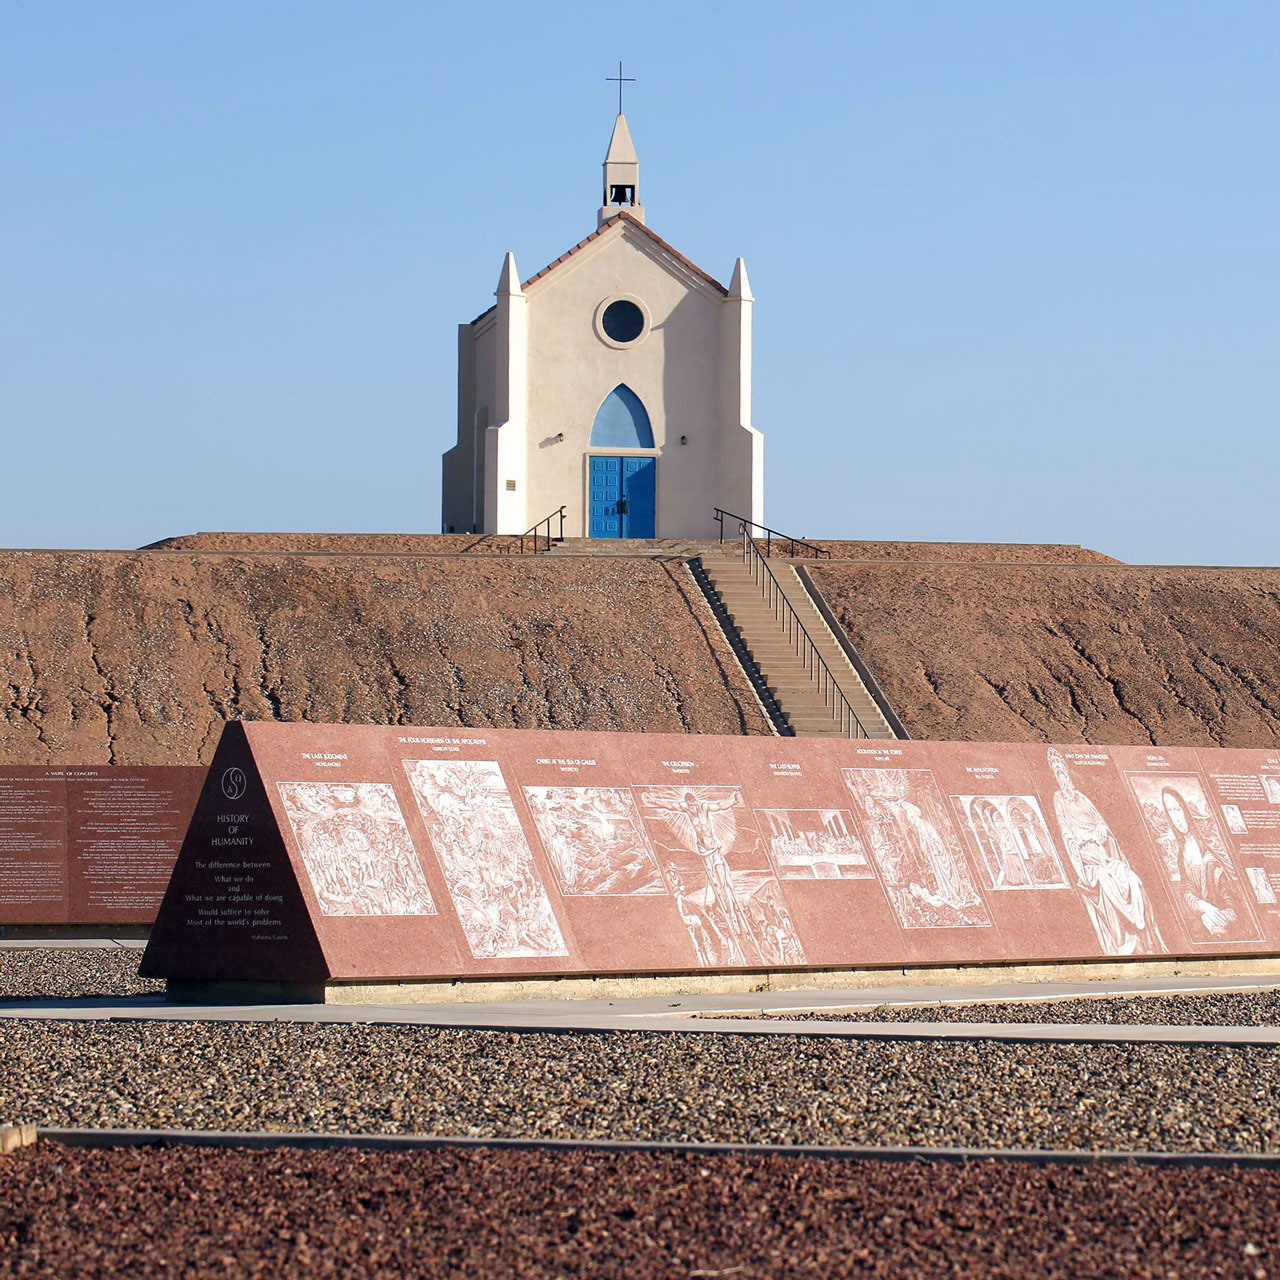 Missouri Red granite monument etched with Renaissance masterpieces in front of the Church on the Hill near Yuma, Arizona